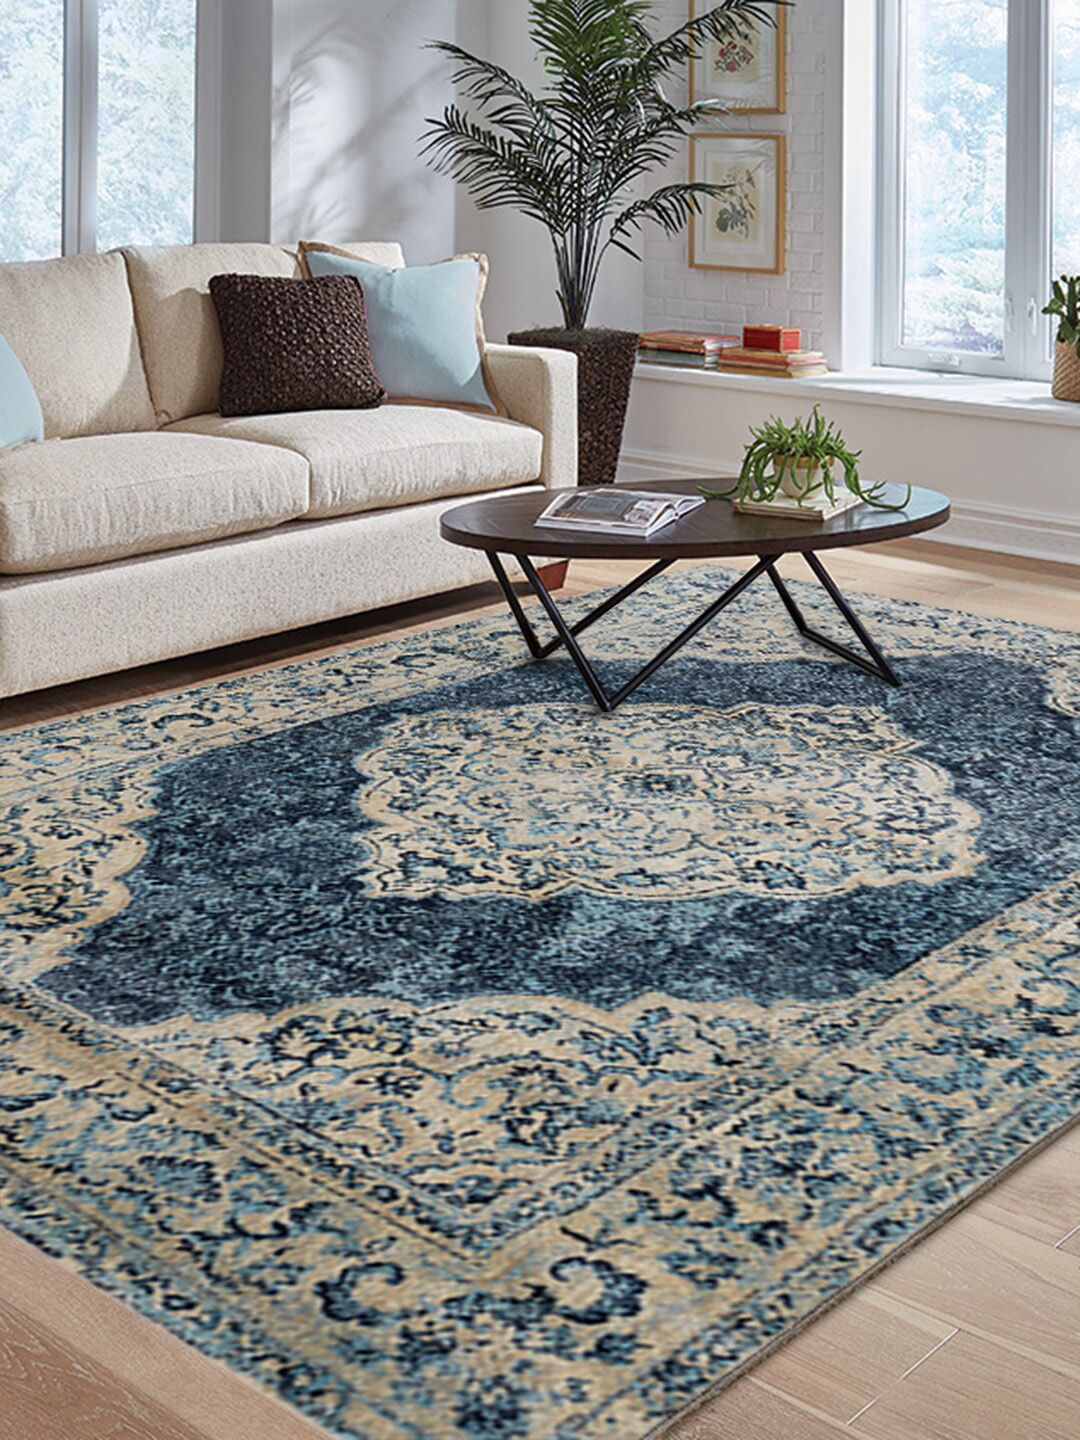 DDecor Blue Traditional Carpet Price in India